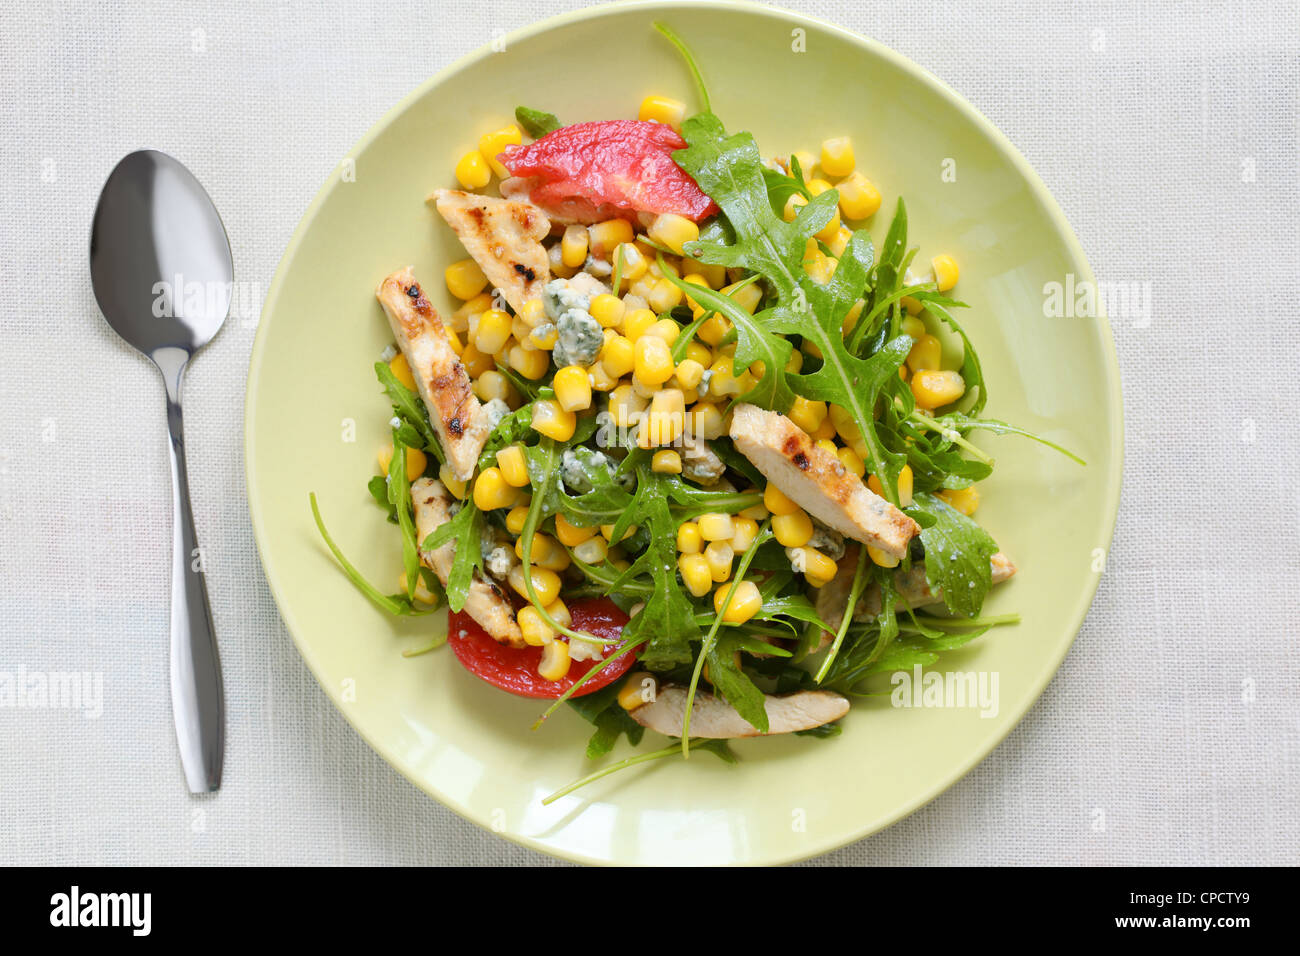 Salad with grilled chicken Stock Photo